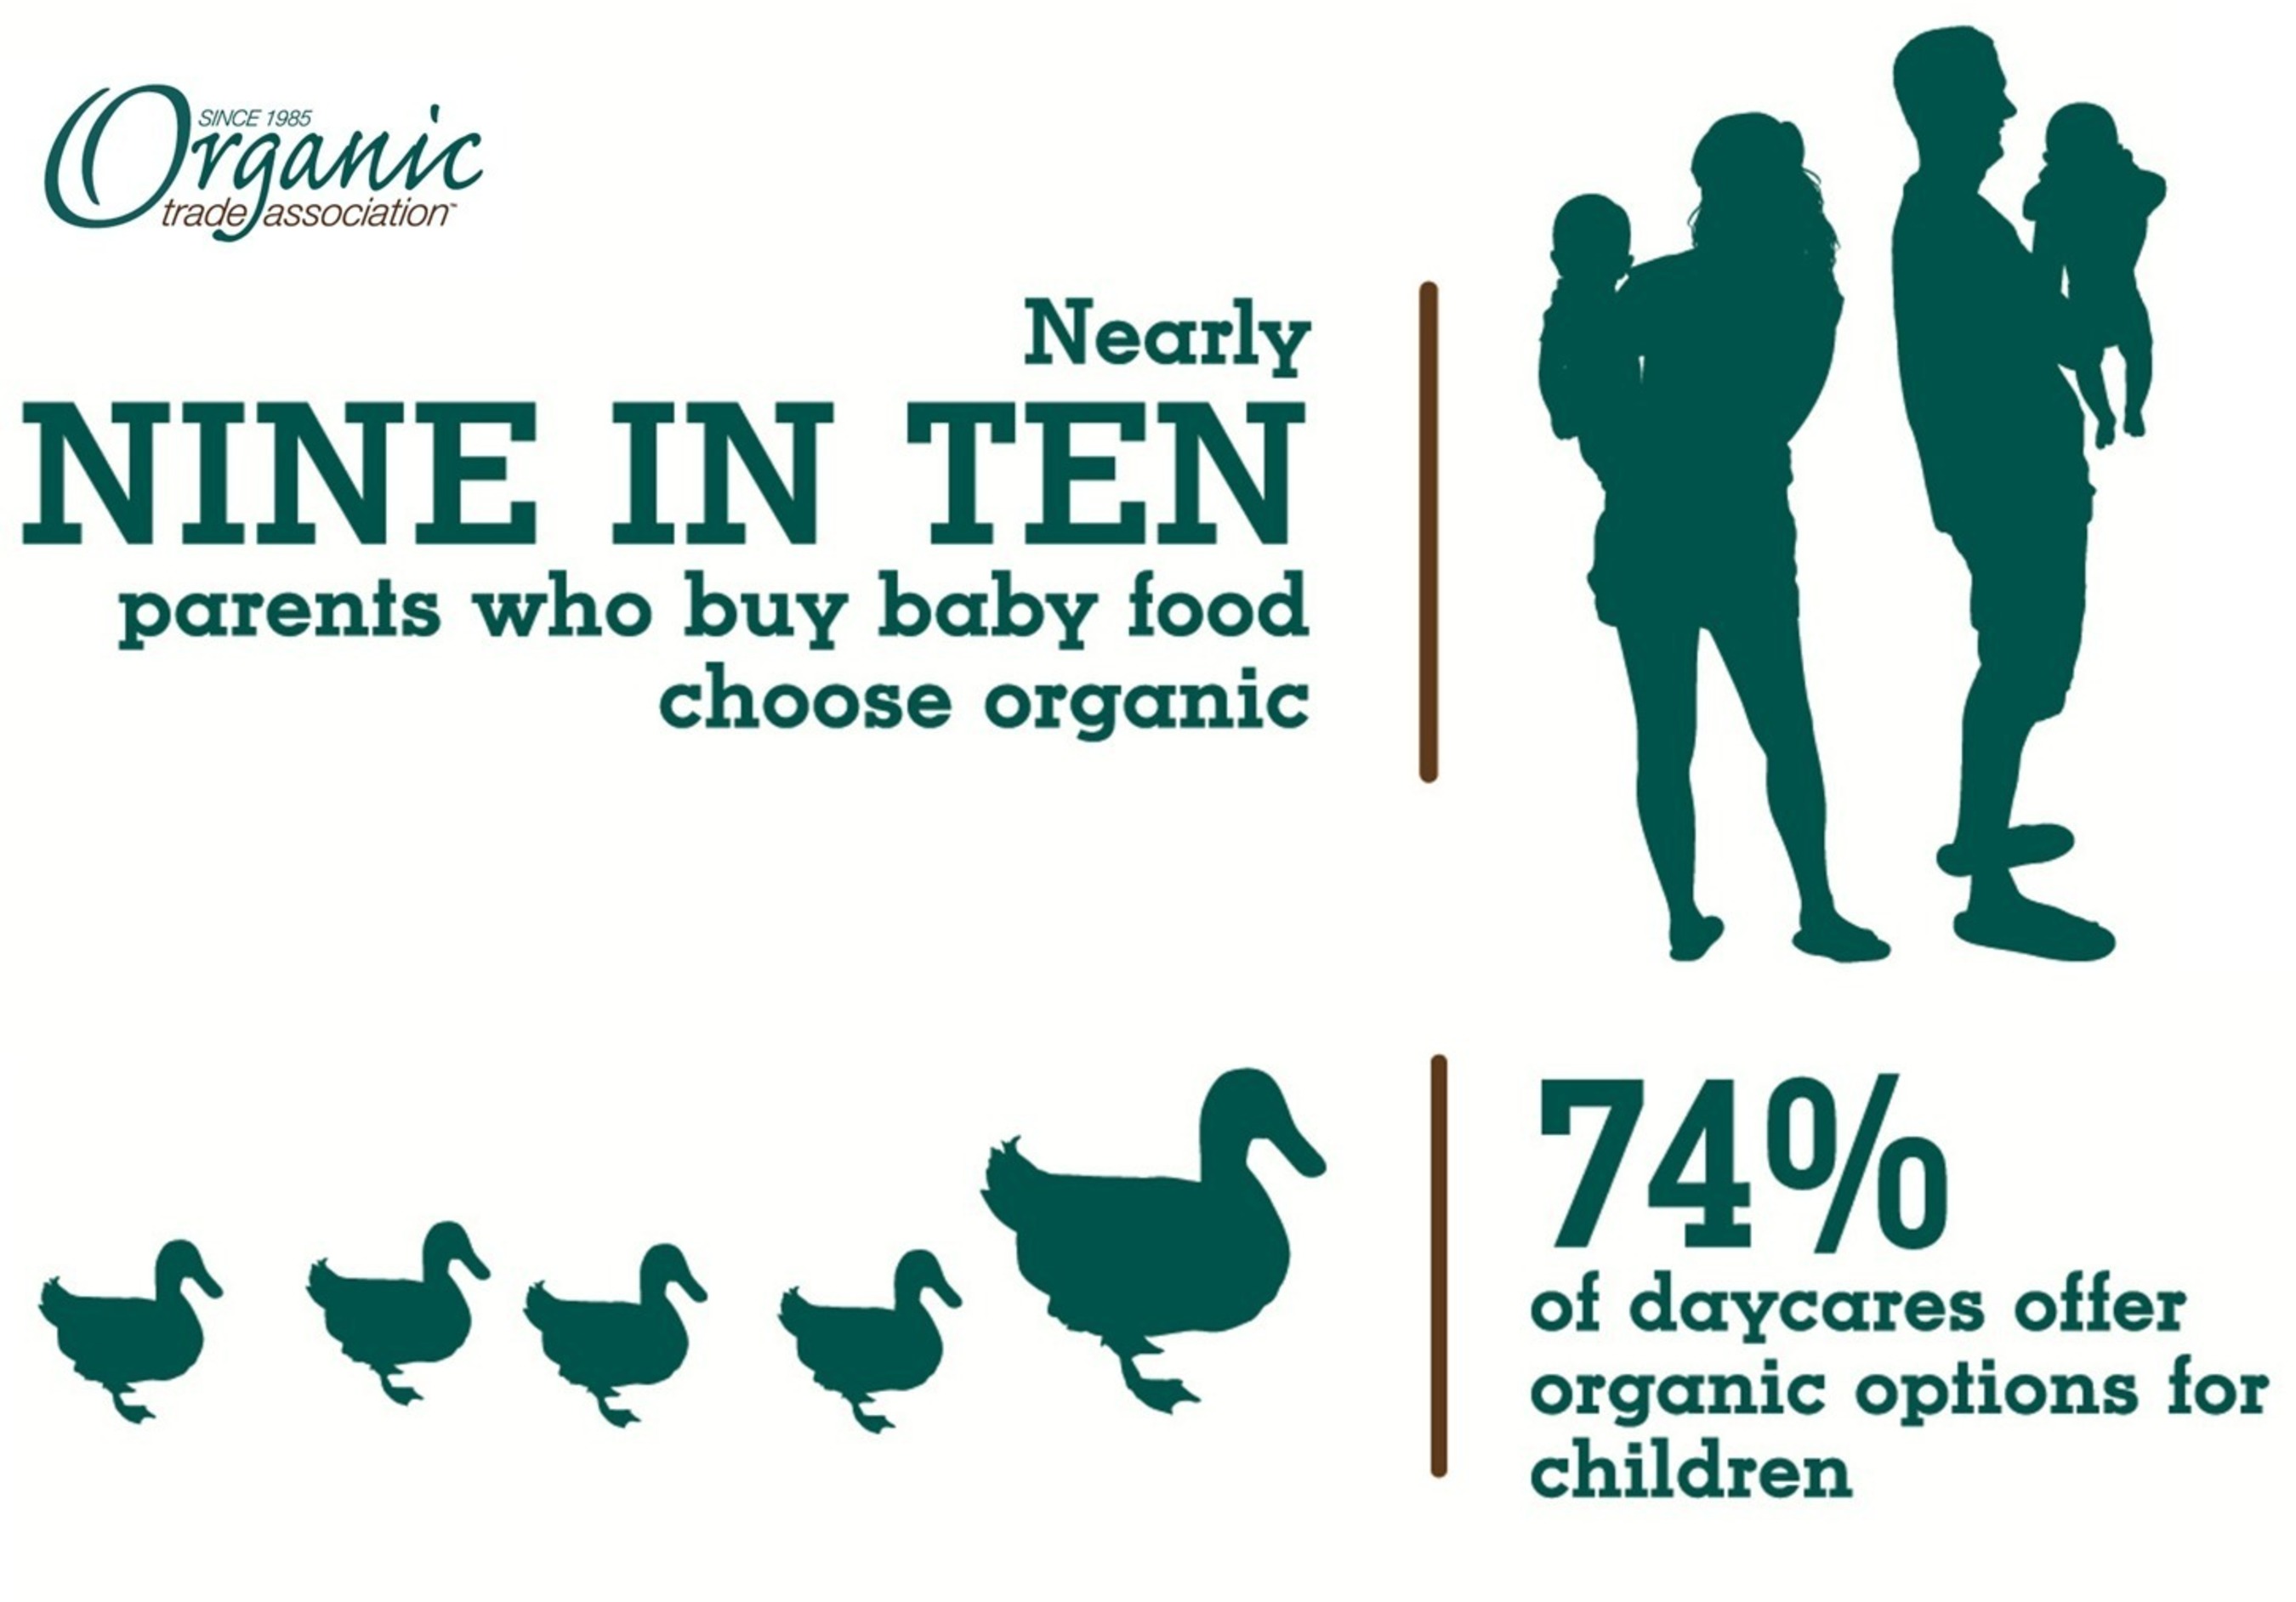 Concern about their children's health is a driving force behind parents' decision to purchase organic products. (PRNewsFoto/Organic Trade Association)